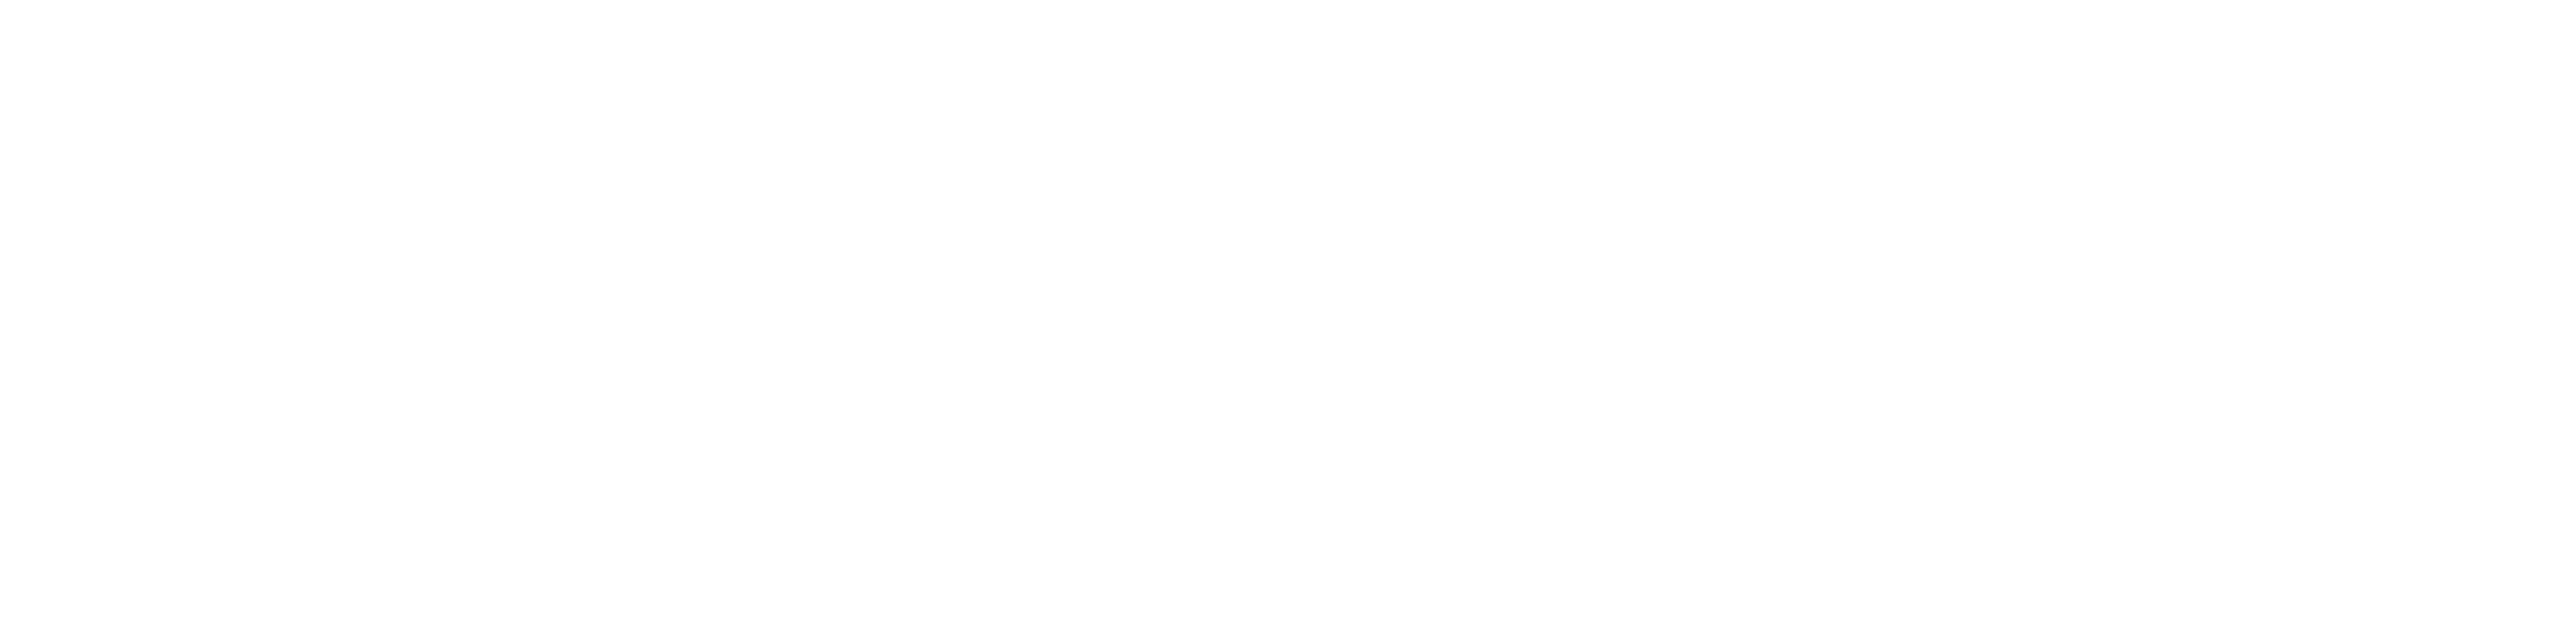 EN Funded by the European Union RGB WHITE